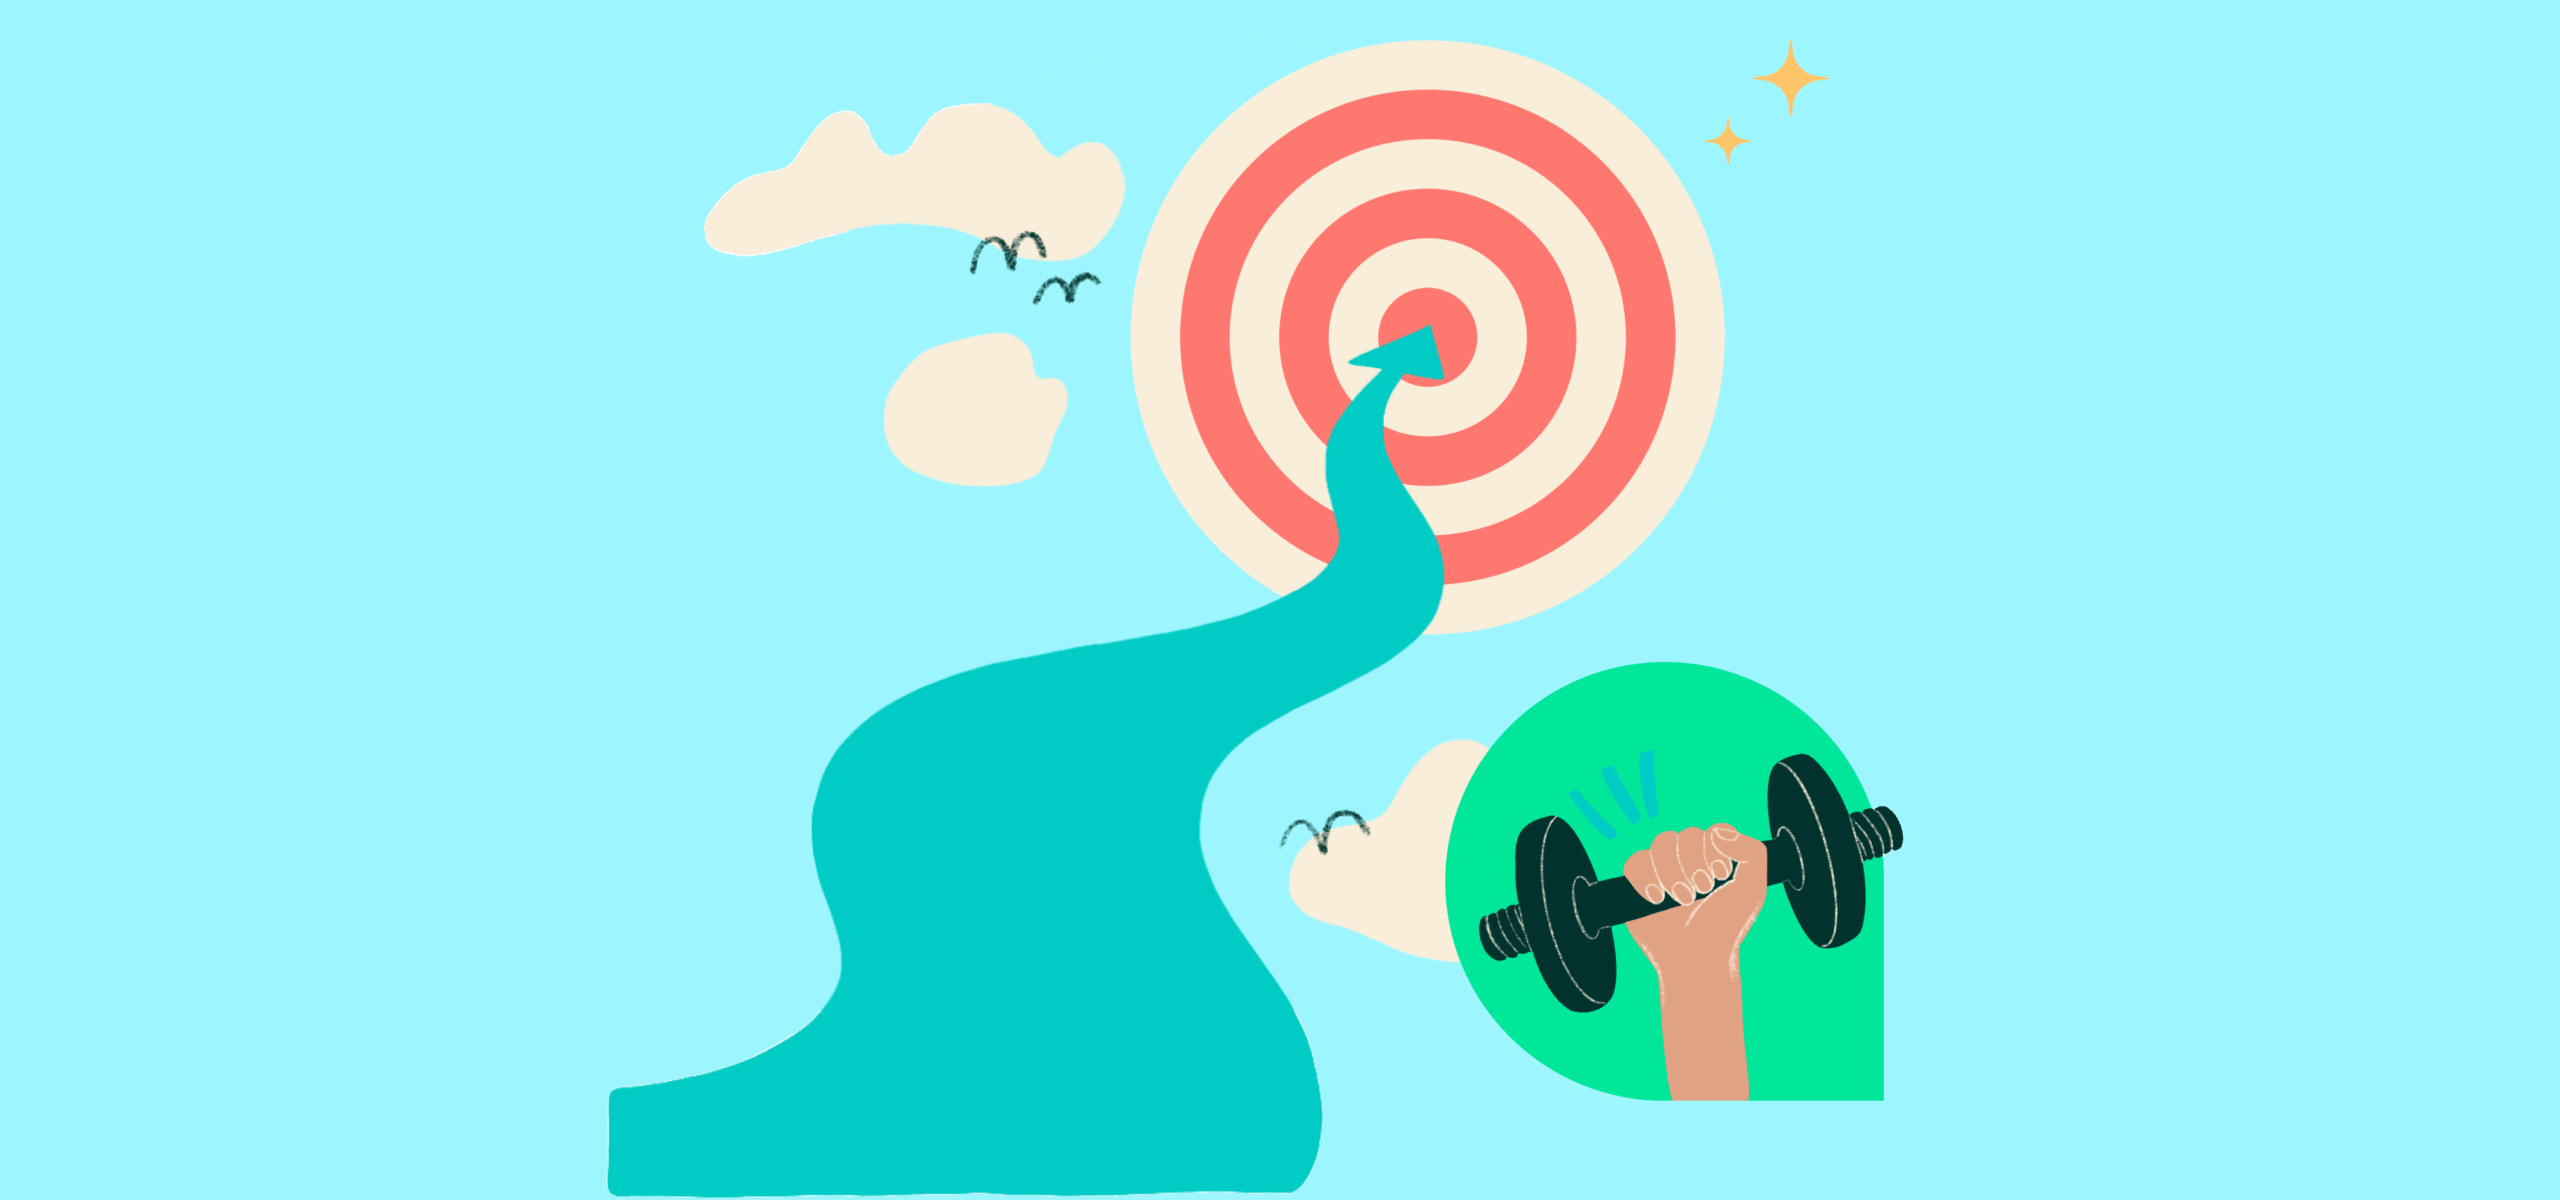 self-advocacy IEP goals visualized with a hand lifting a dumbell and a target being hit in the bullseye